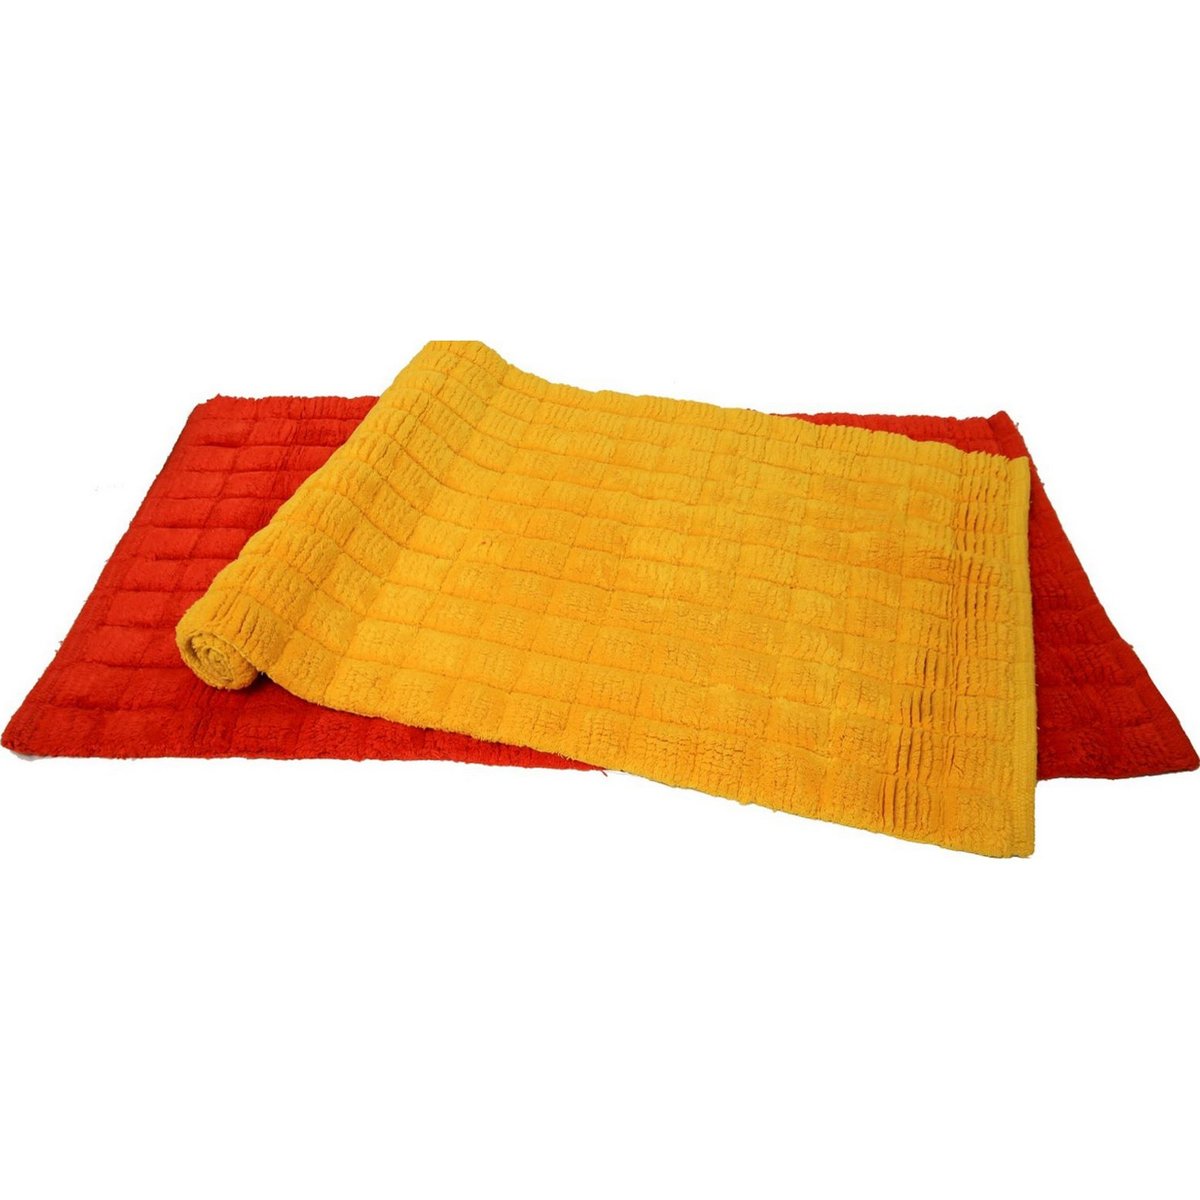 Home Well Bath Mat Cotton WH03 Assorted 1pc